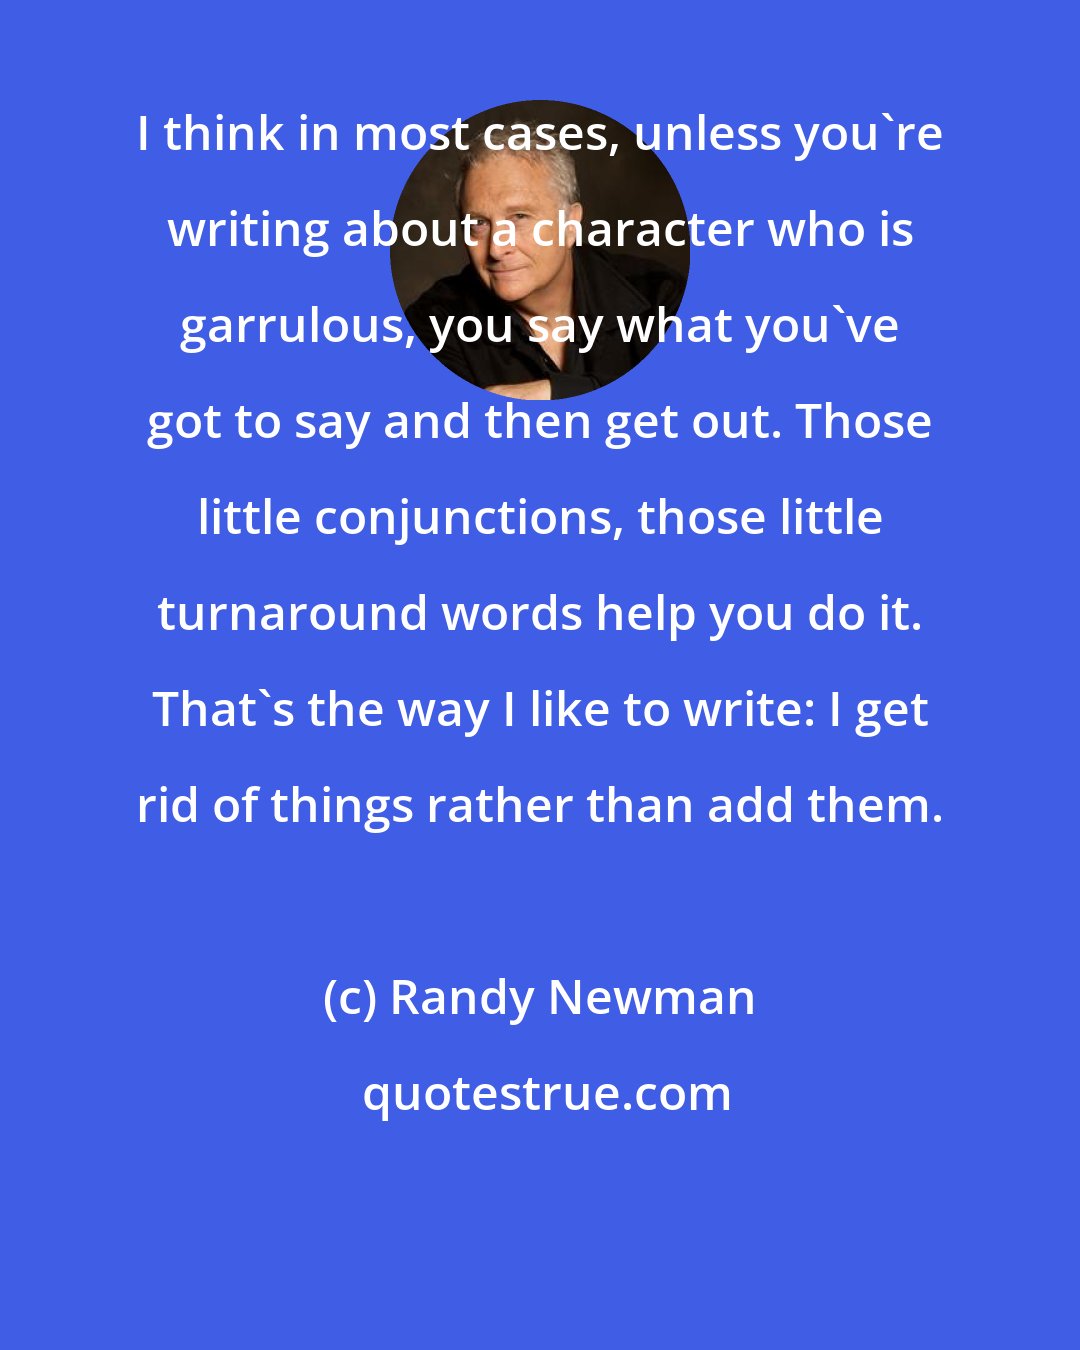 Randy Newman: I think in most cases, unless you're writing about a character who is garrulous, you say what you've got to say and then get out. Those little conjunctions, those little turnaround words help you do it. That's the way I like to write: I get rid of things rather than add them.